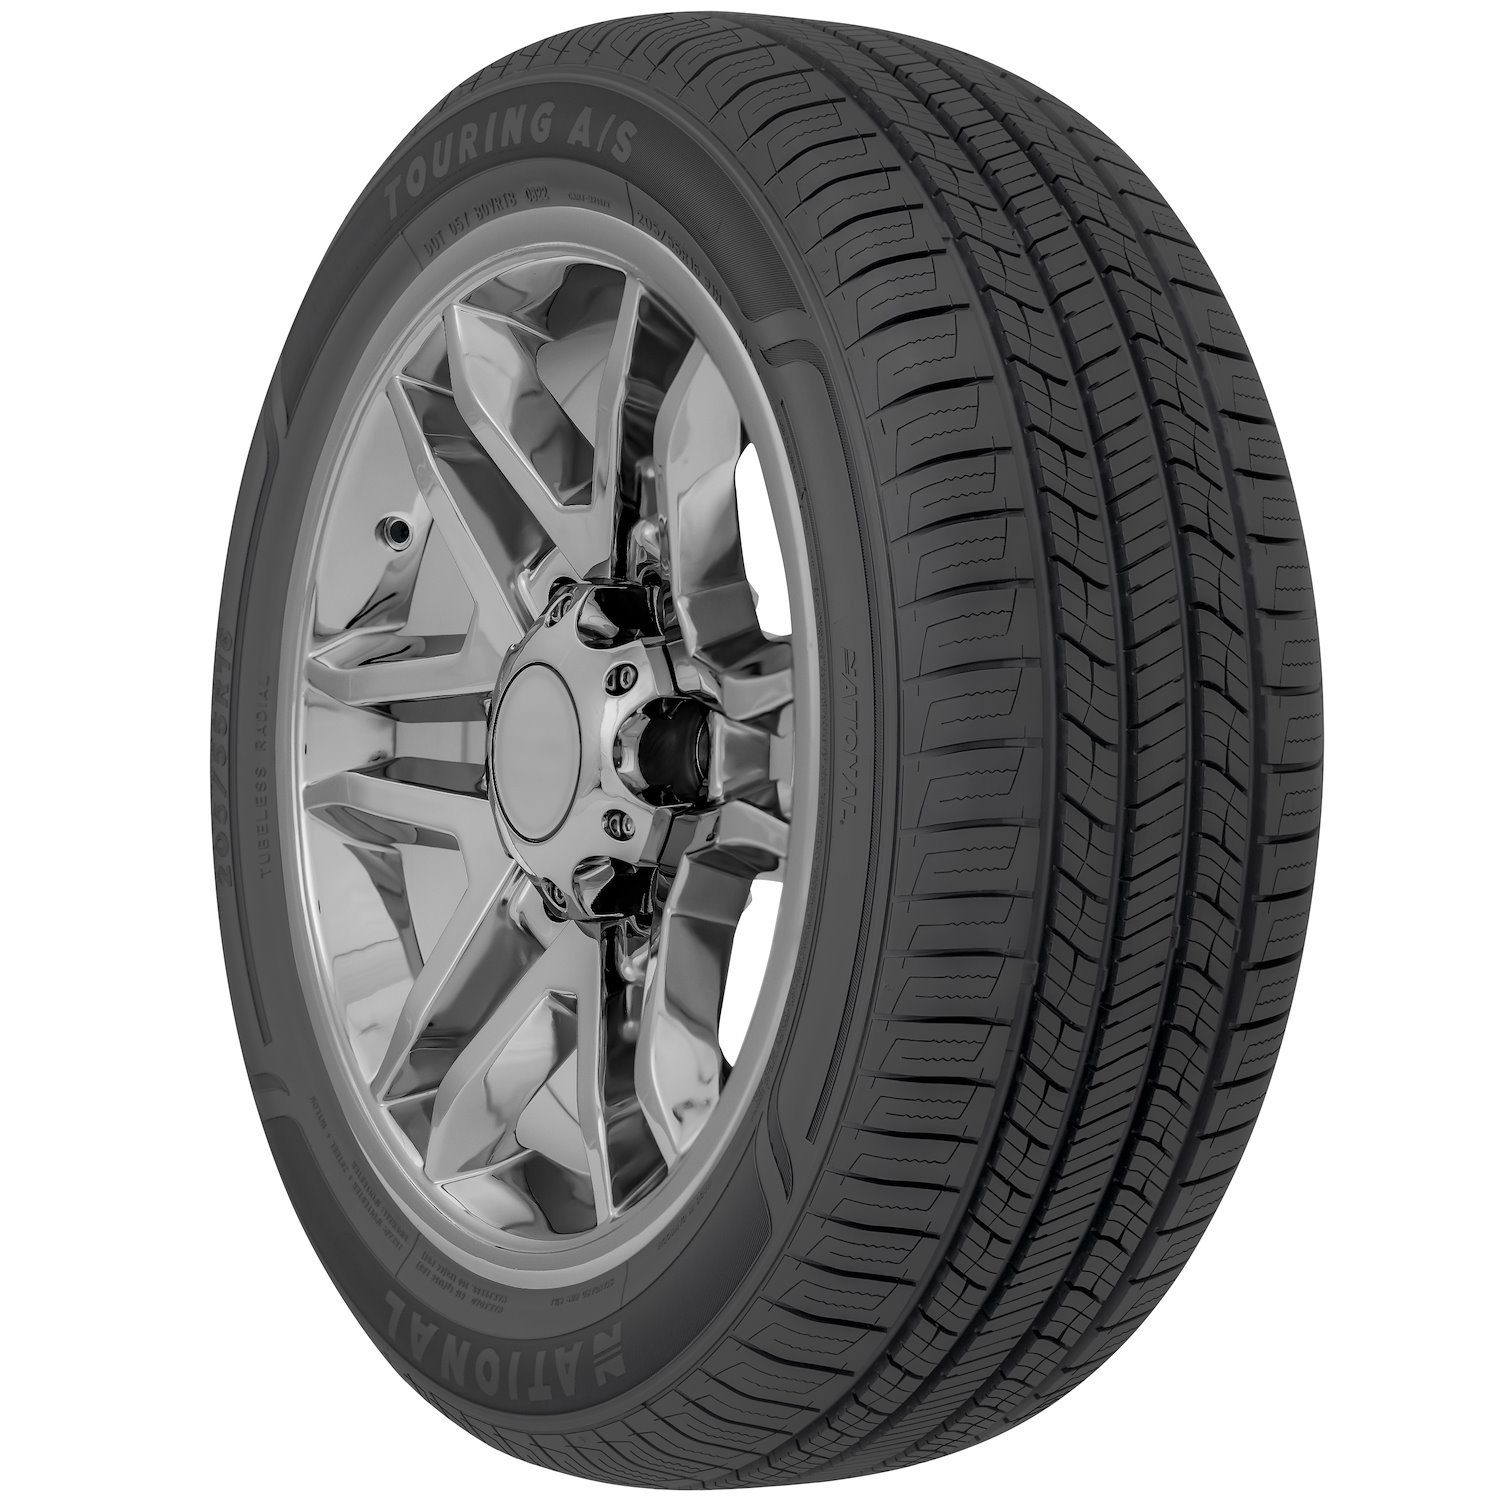 NLR83 Touring A/S Tire, 225/65R16